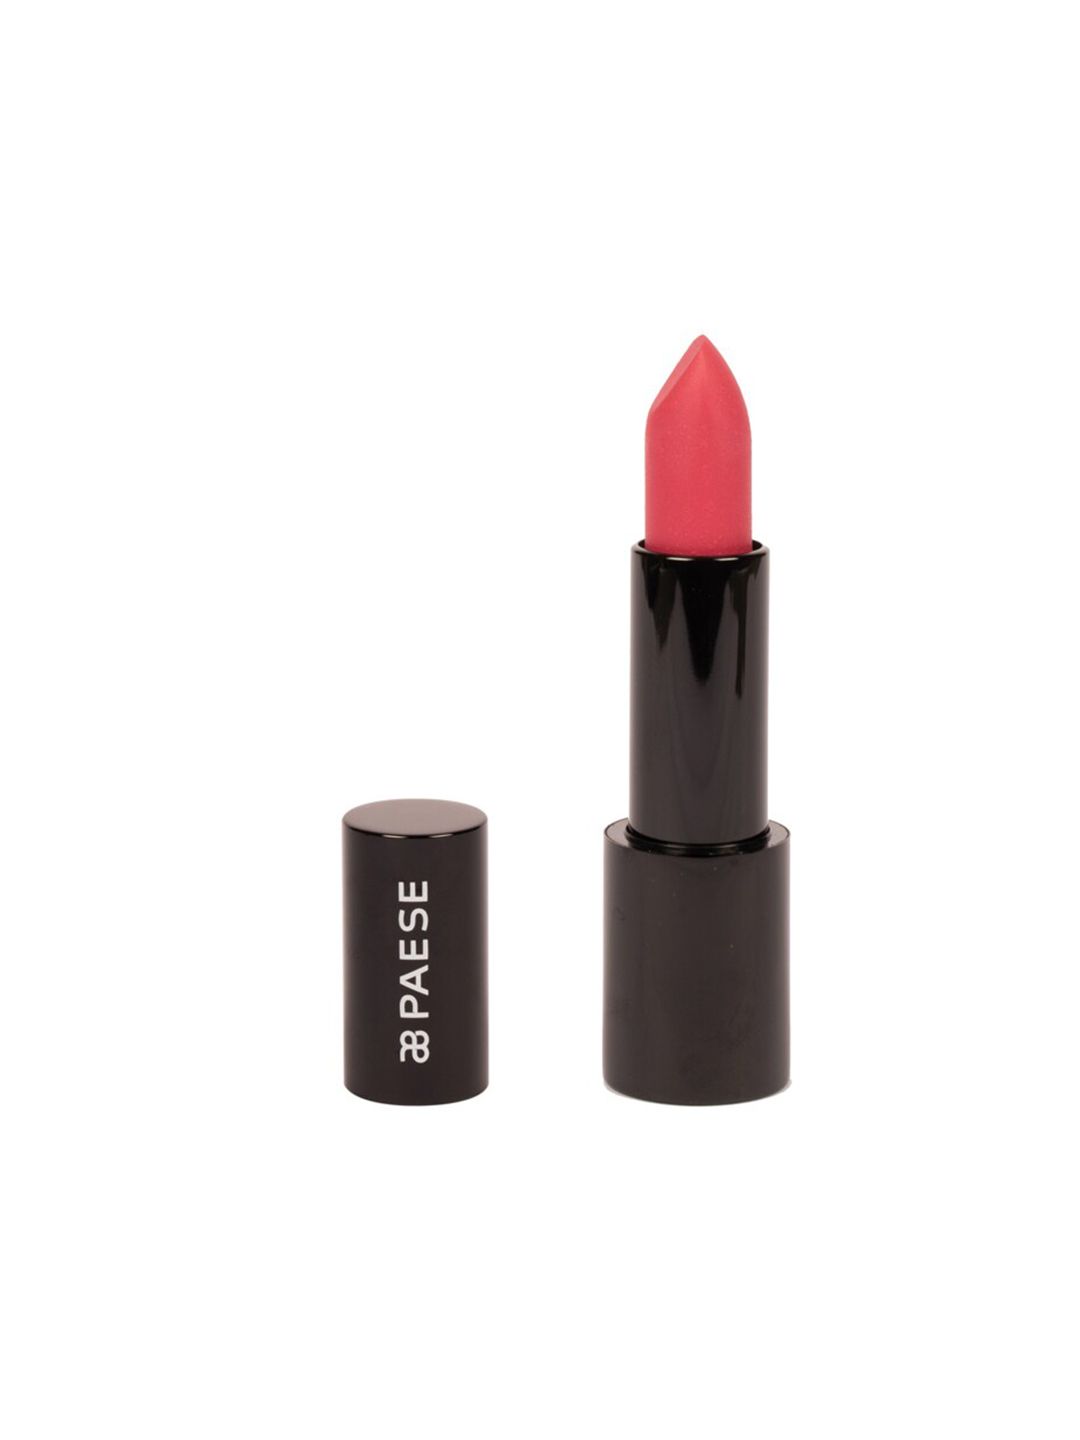 Paese Cosmetics Mattologie Matte Lipstick with Rice Oil 4.3 g - Oh Pink 108 Price in India